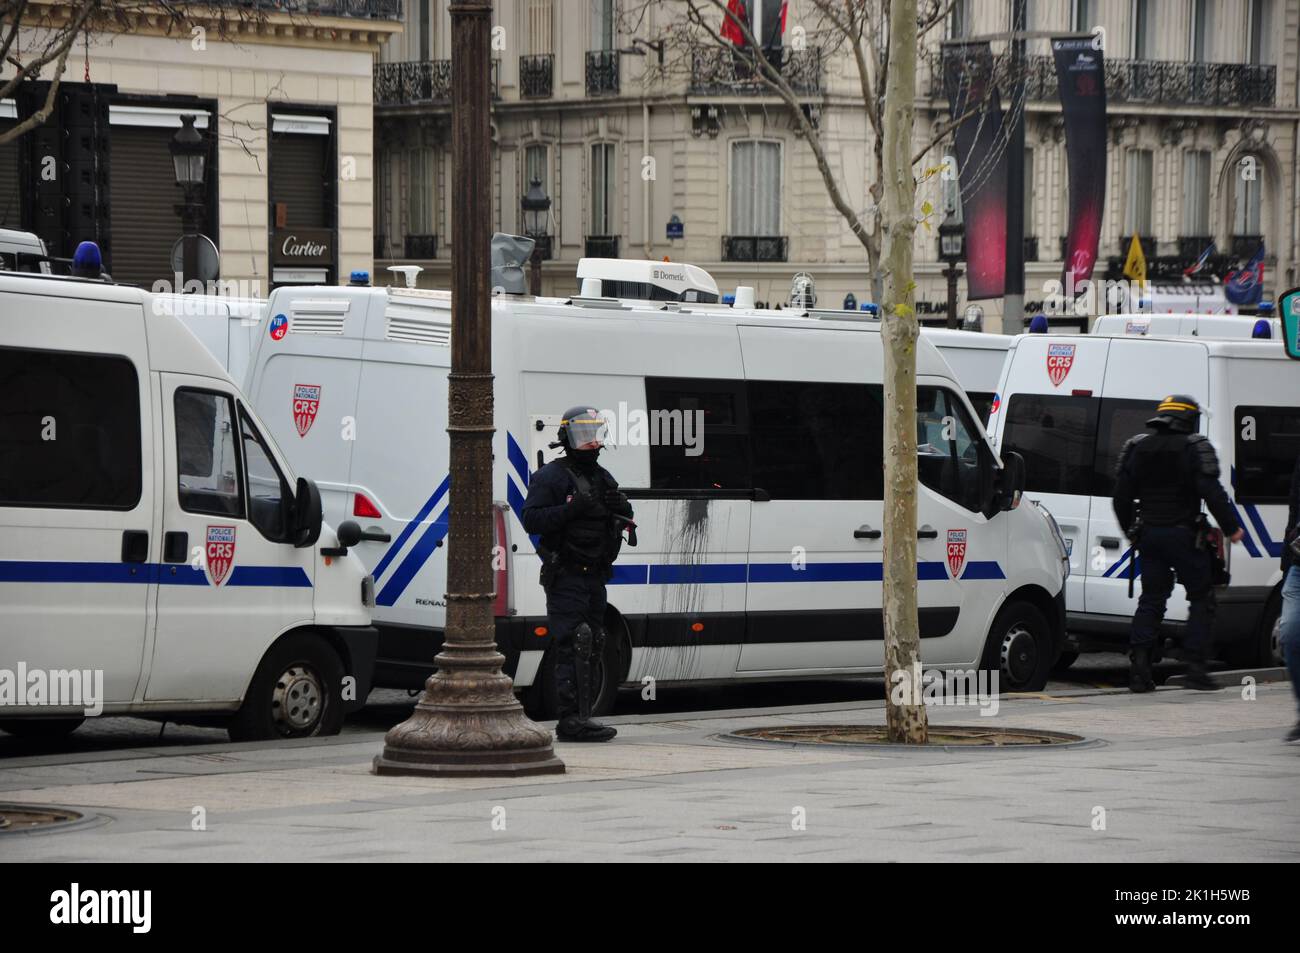 Police officers wearing helmets and carrying batons in front of police buses on Avenue des Champs-Elysees during yellow vests protests in Paris Stock Photo